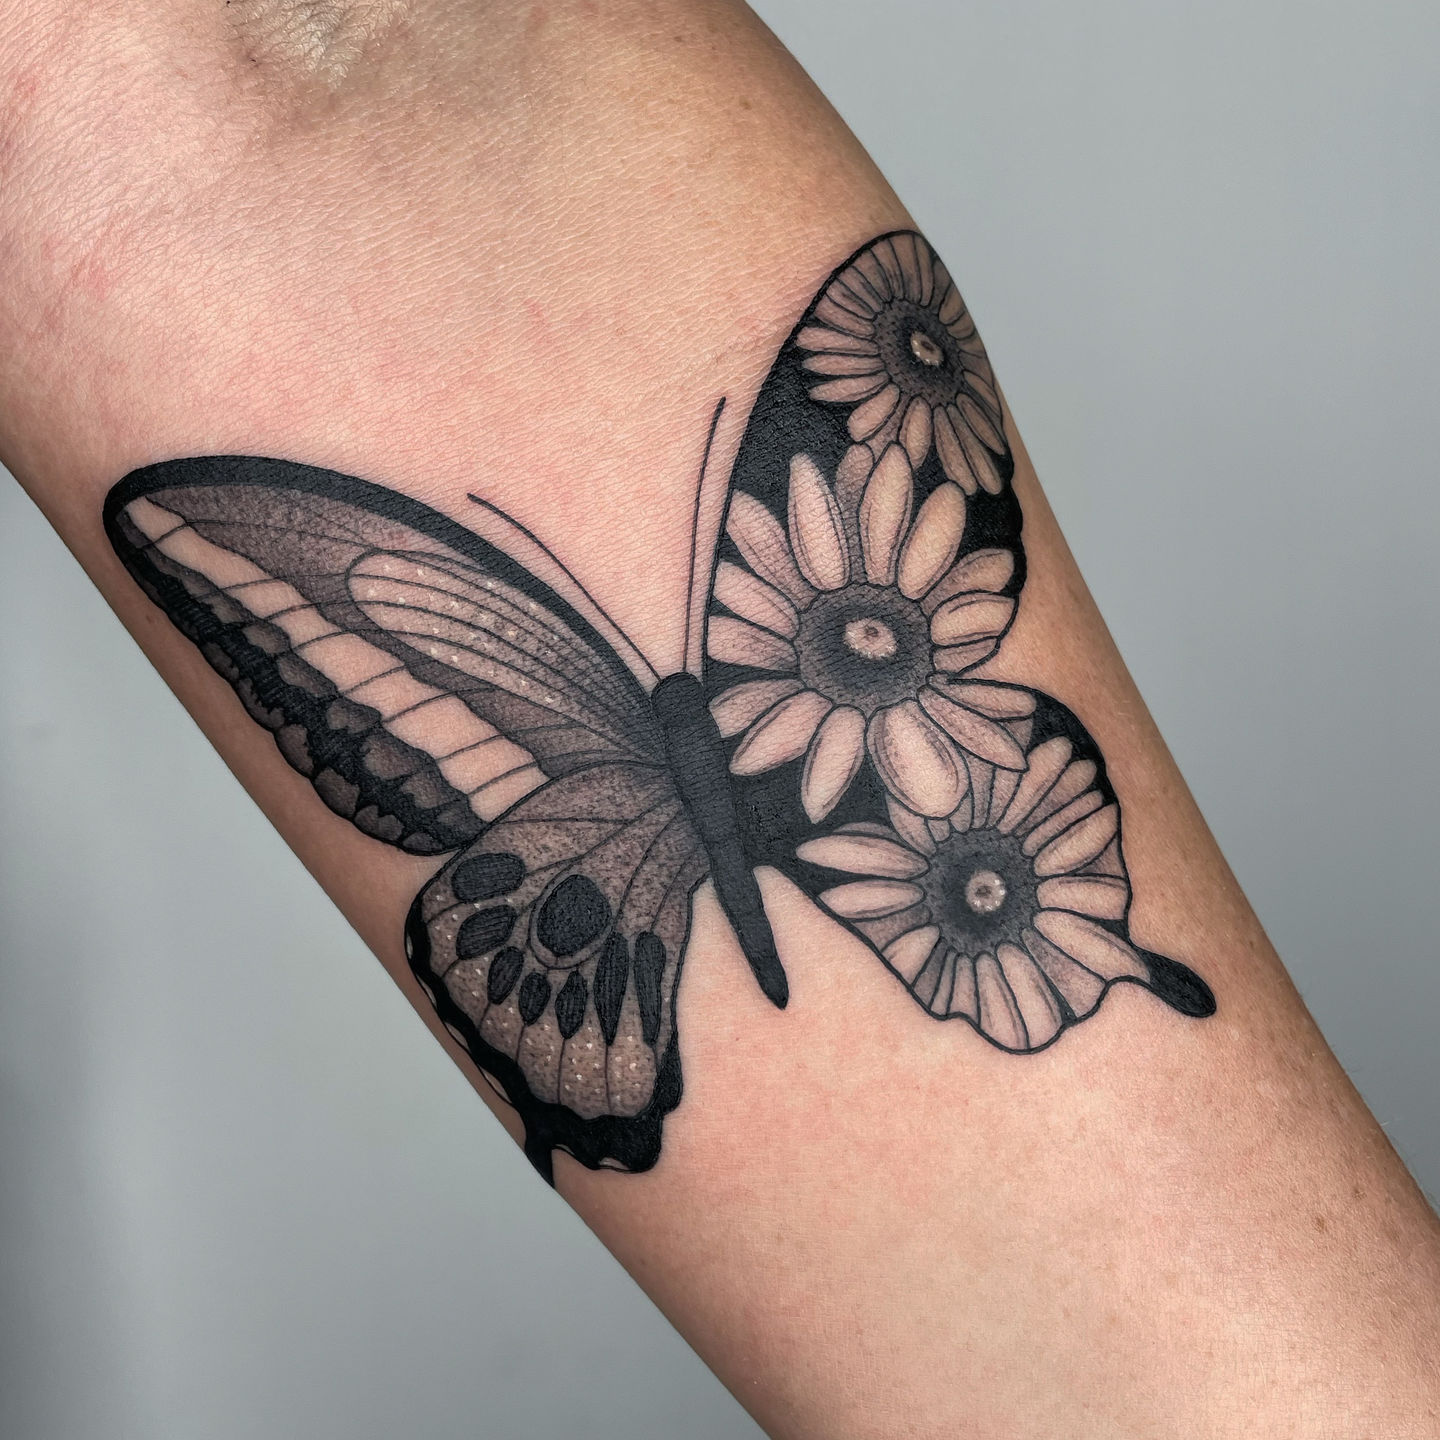 The best tattoo artists for these popular styles in Toronto